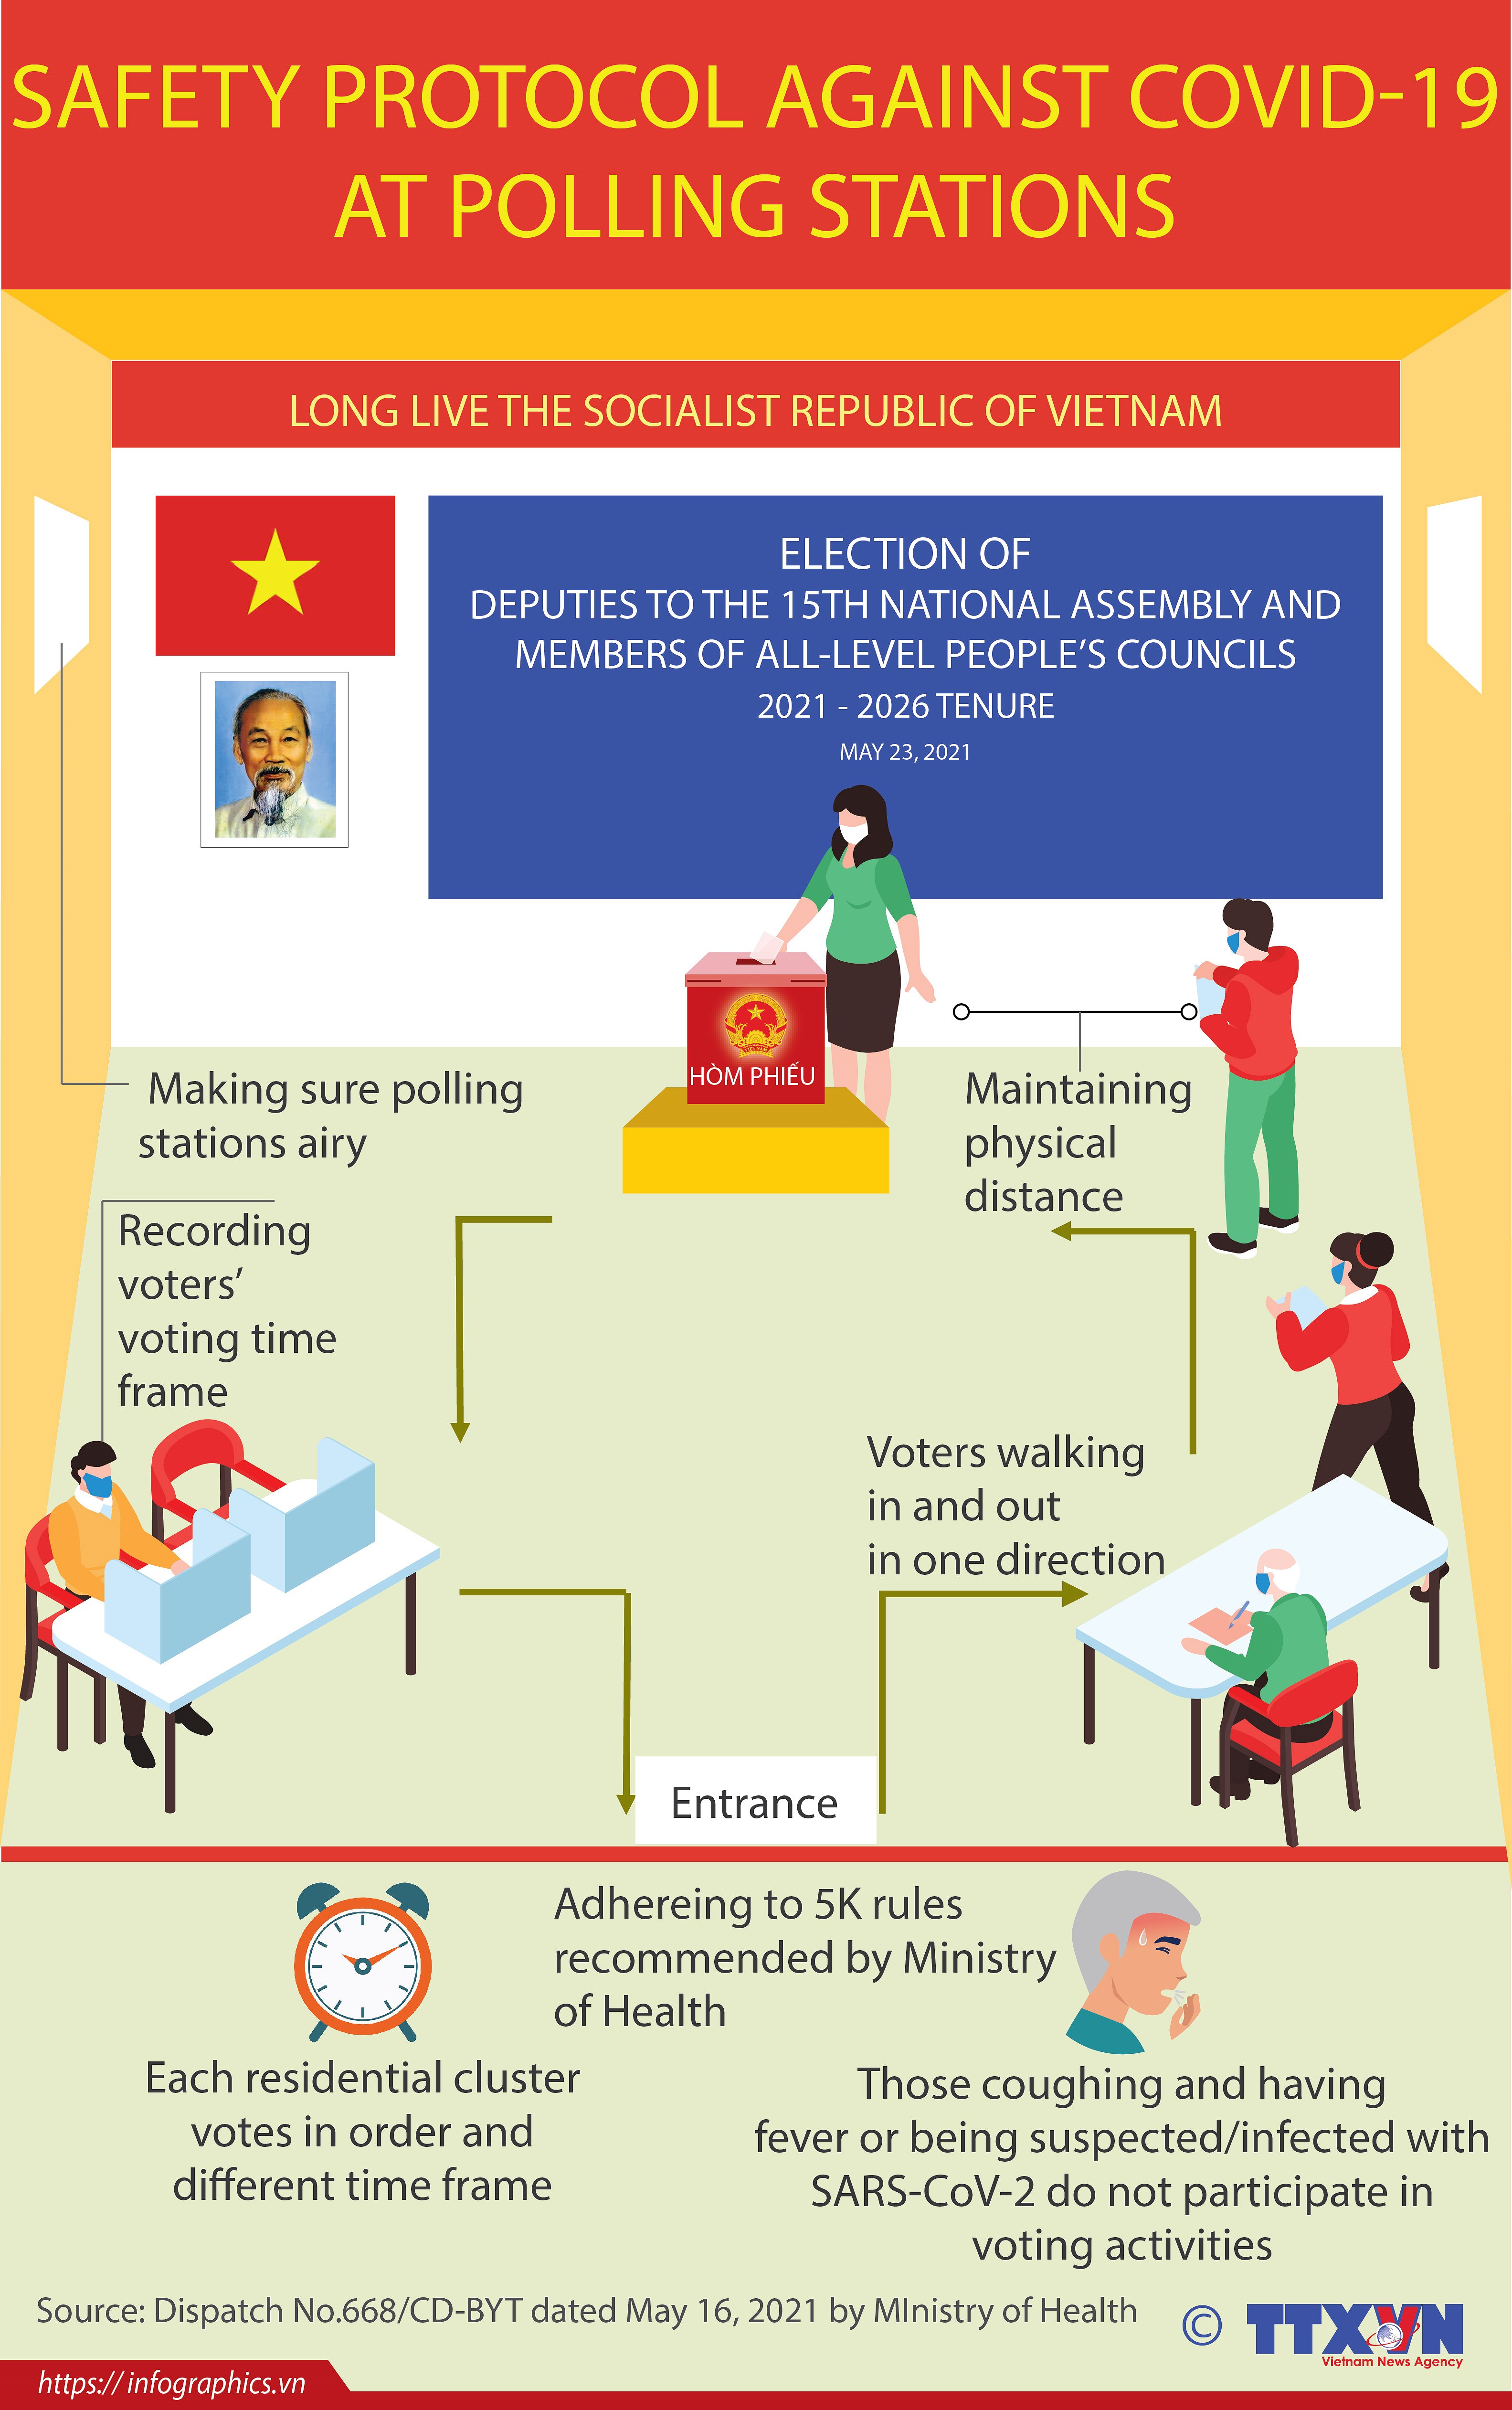 Safety protocol against COVID-19 at polling stations hinh anh 1